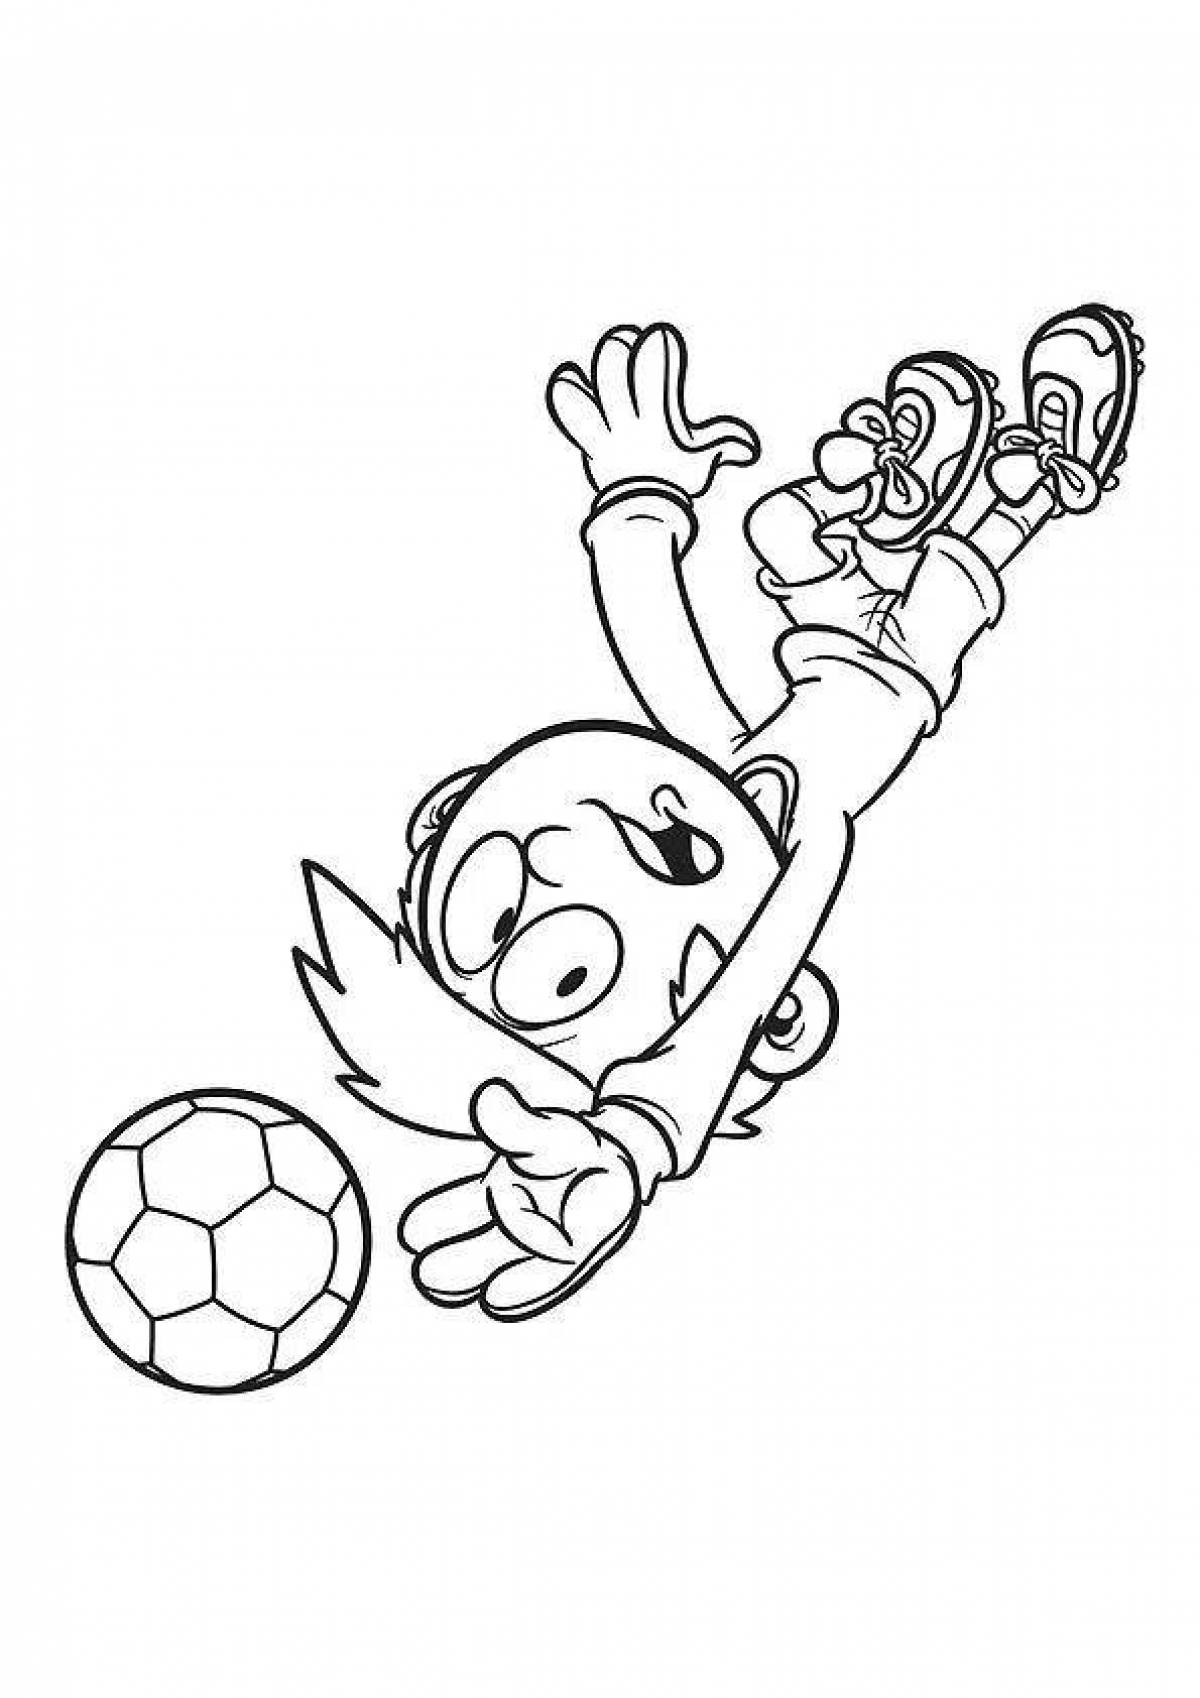 Coloring page bright football goalkeeper